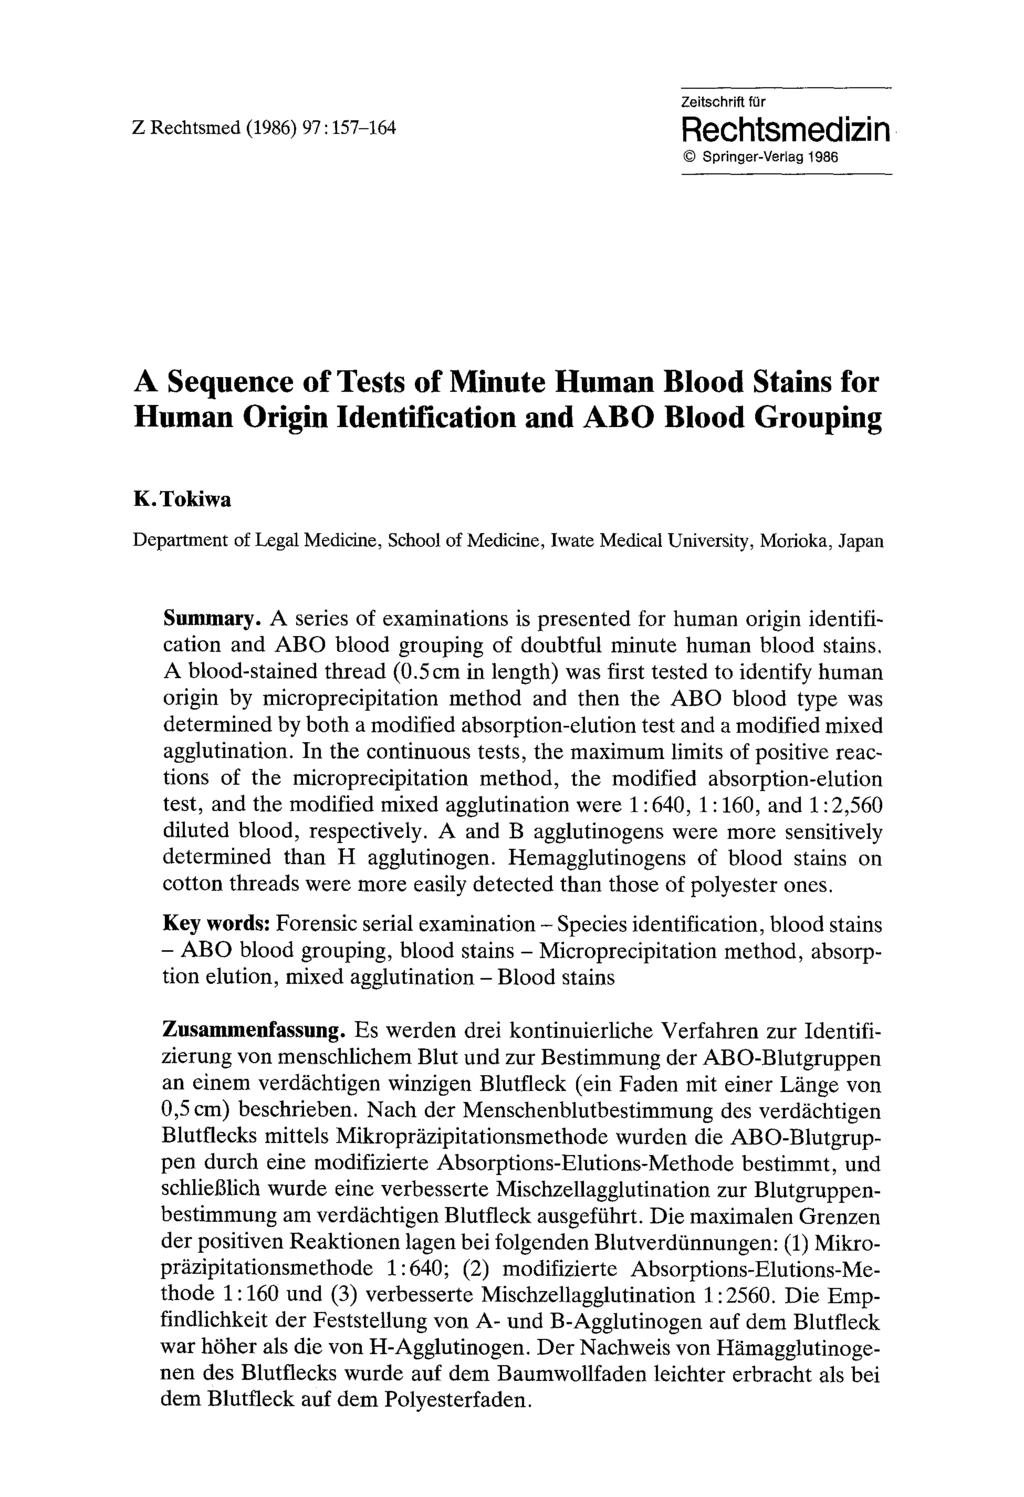 Z Rechtsmed (1986) 97 : 157-164 Zeitschrift for Rechtsmedizin Springer-Verlag 1986 A Sequence of Tests of Minute Human Blood Stains for Human Origin Identification and ABO Blood Grouping K.